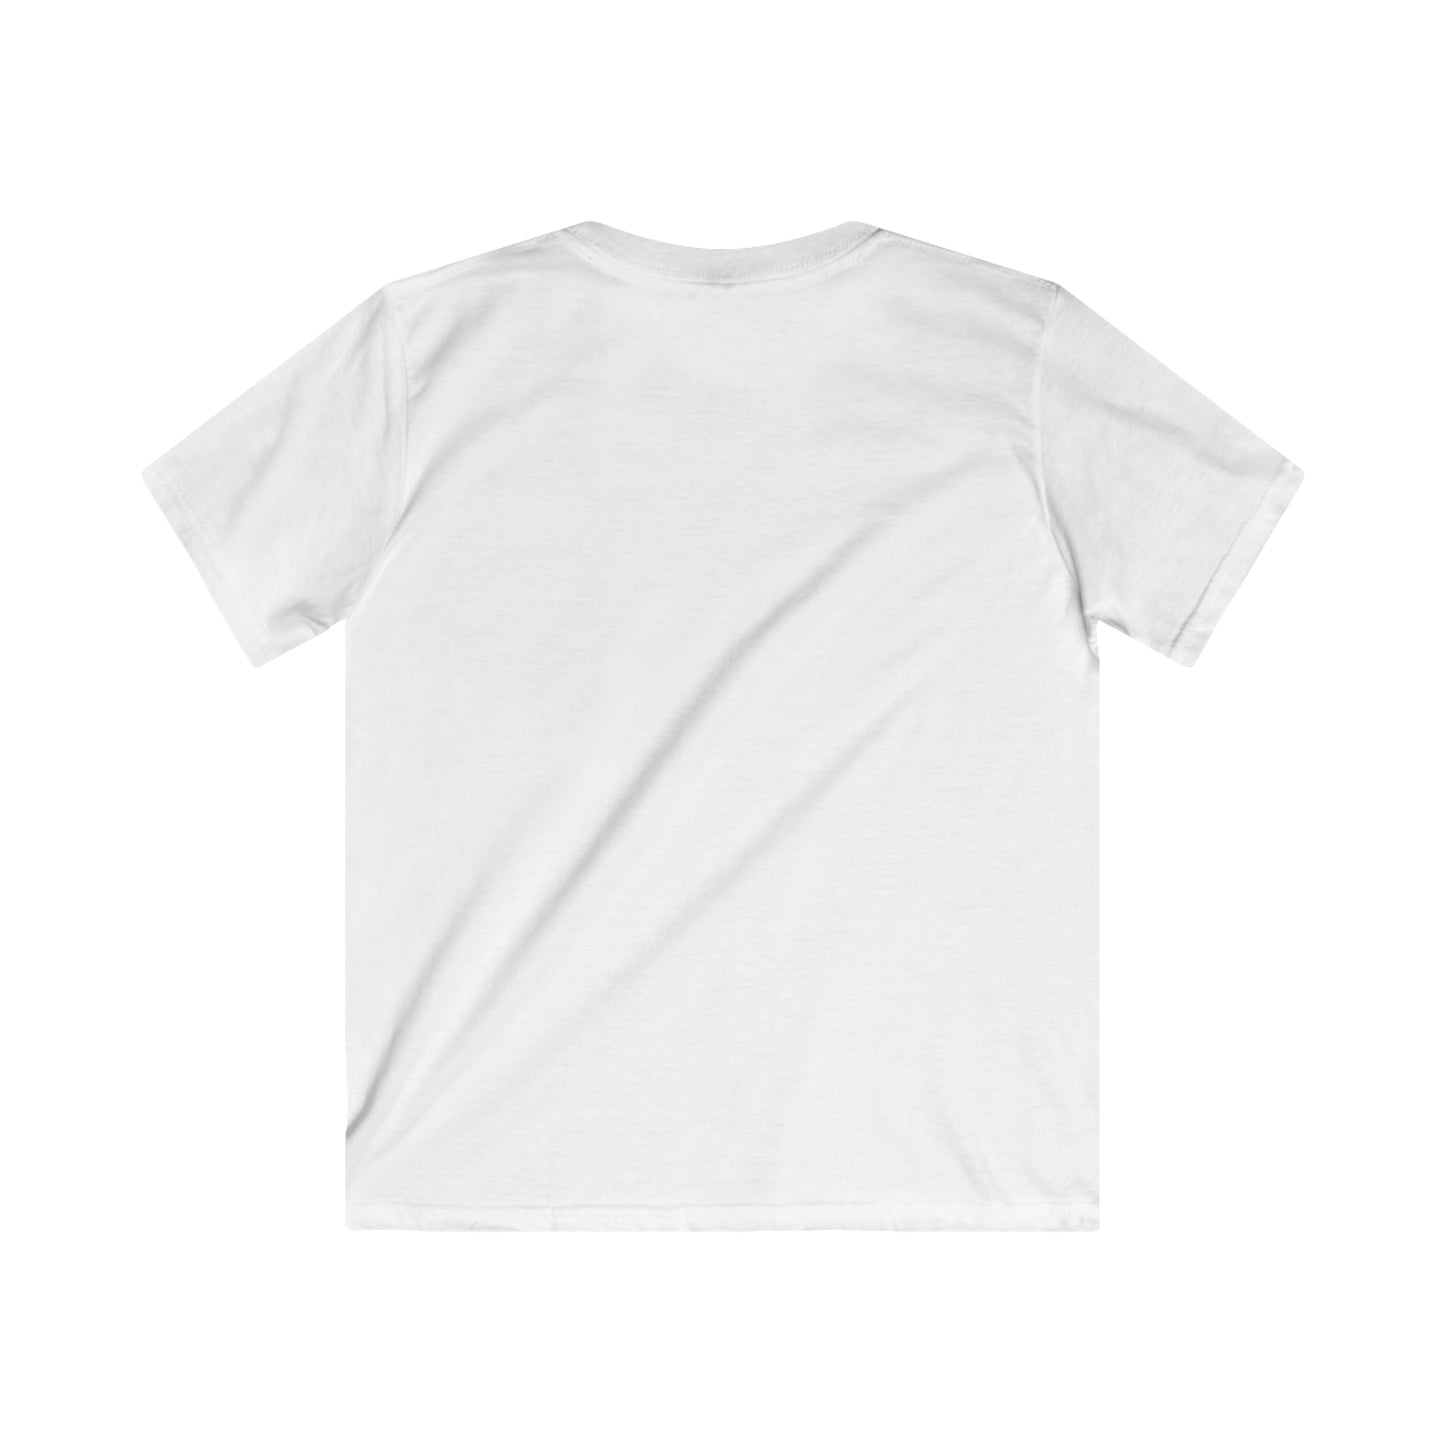 I See You. Kids Softstyle Tee